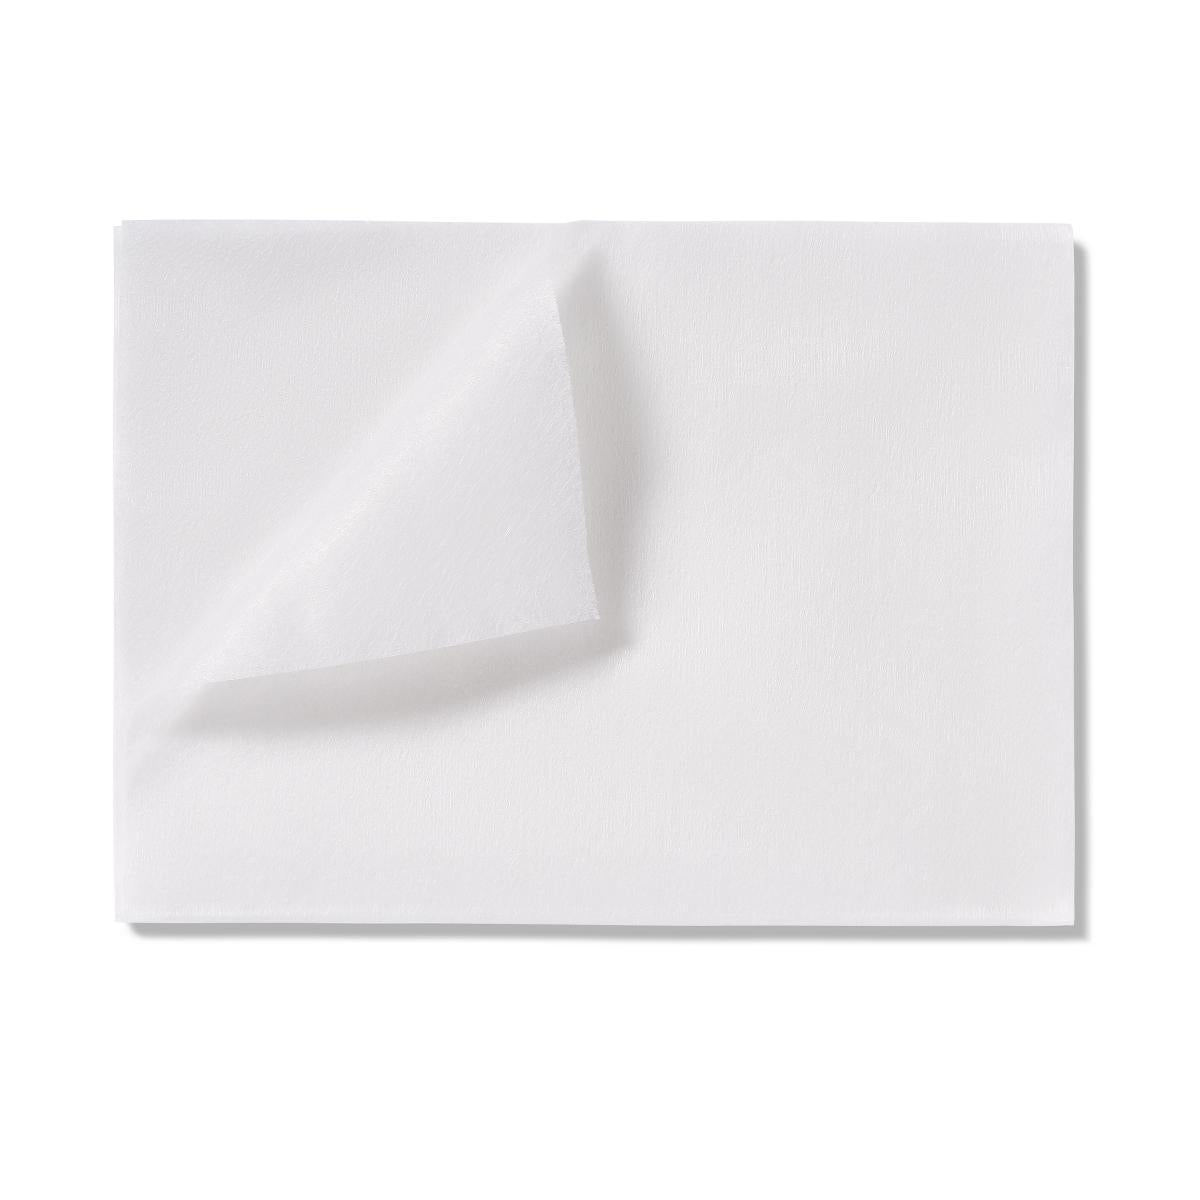 50 Each-Bag / White / 10"X13" Incontinence - MEDLINE - Wasatch Medical Supply